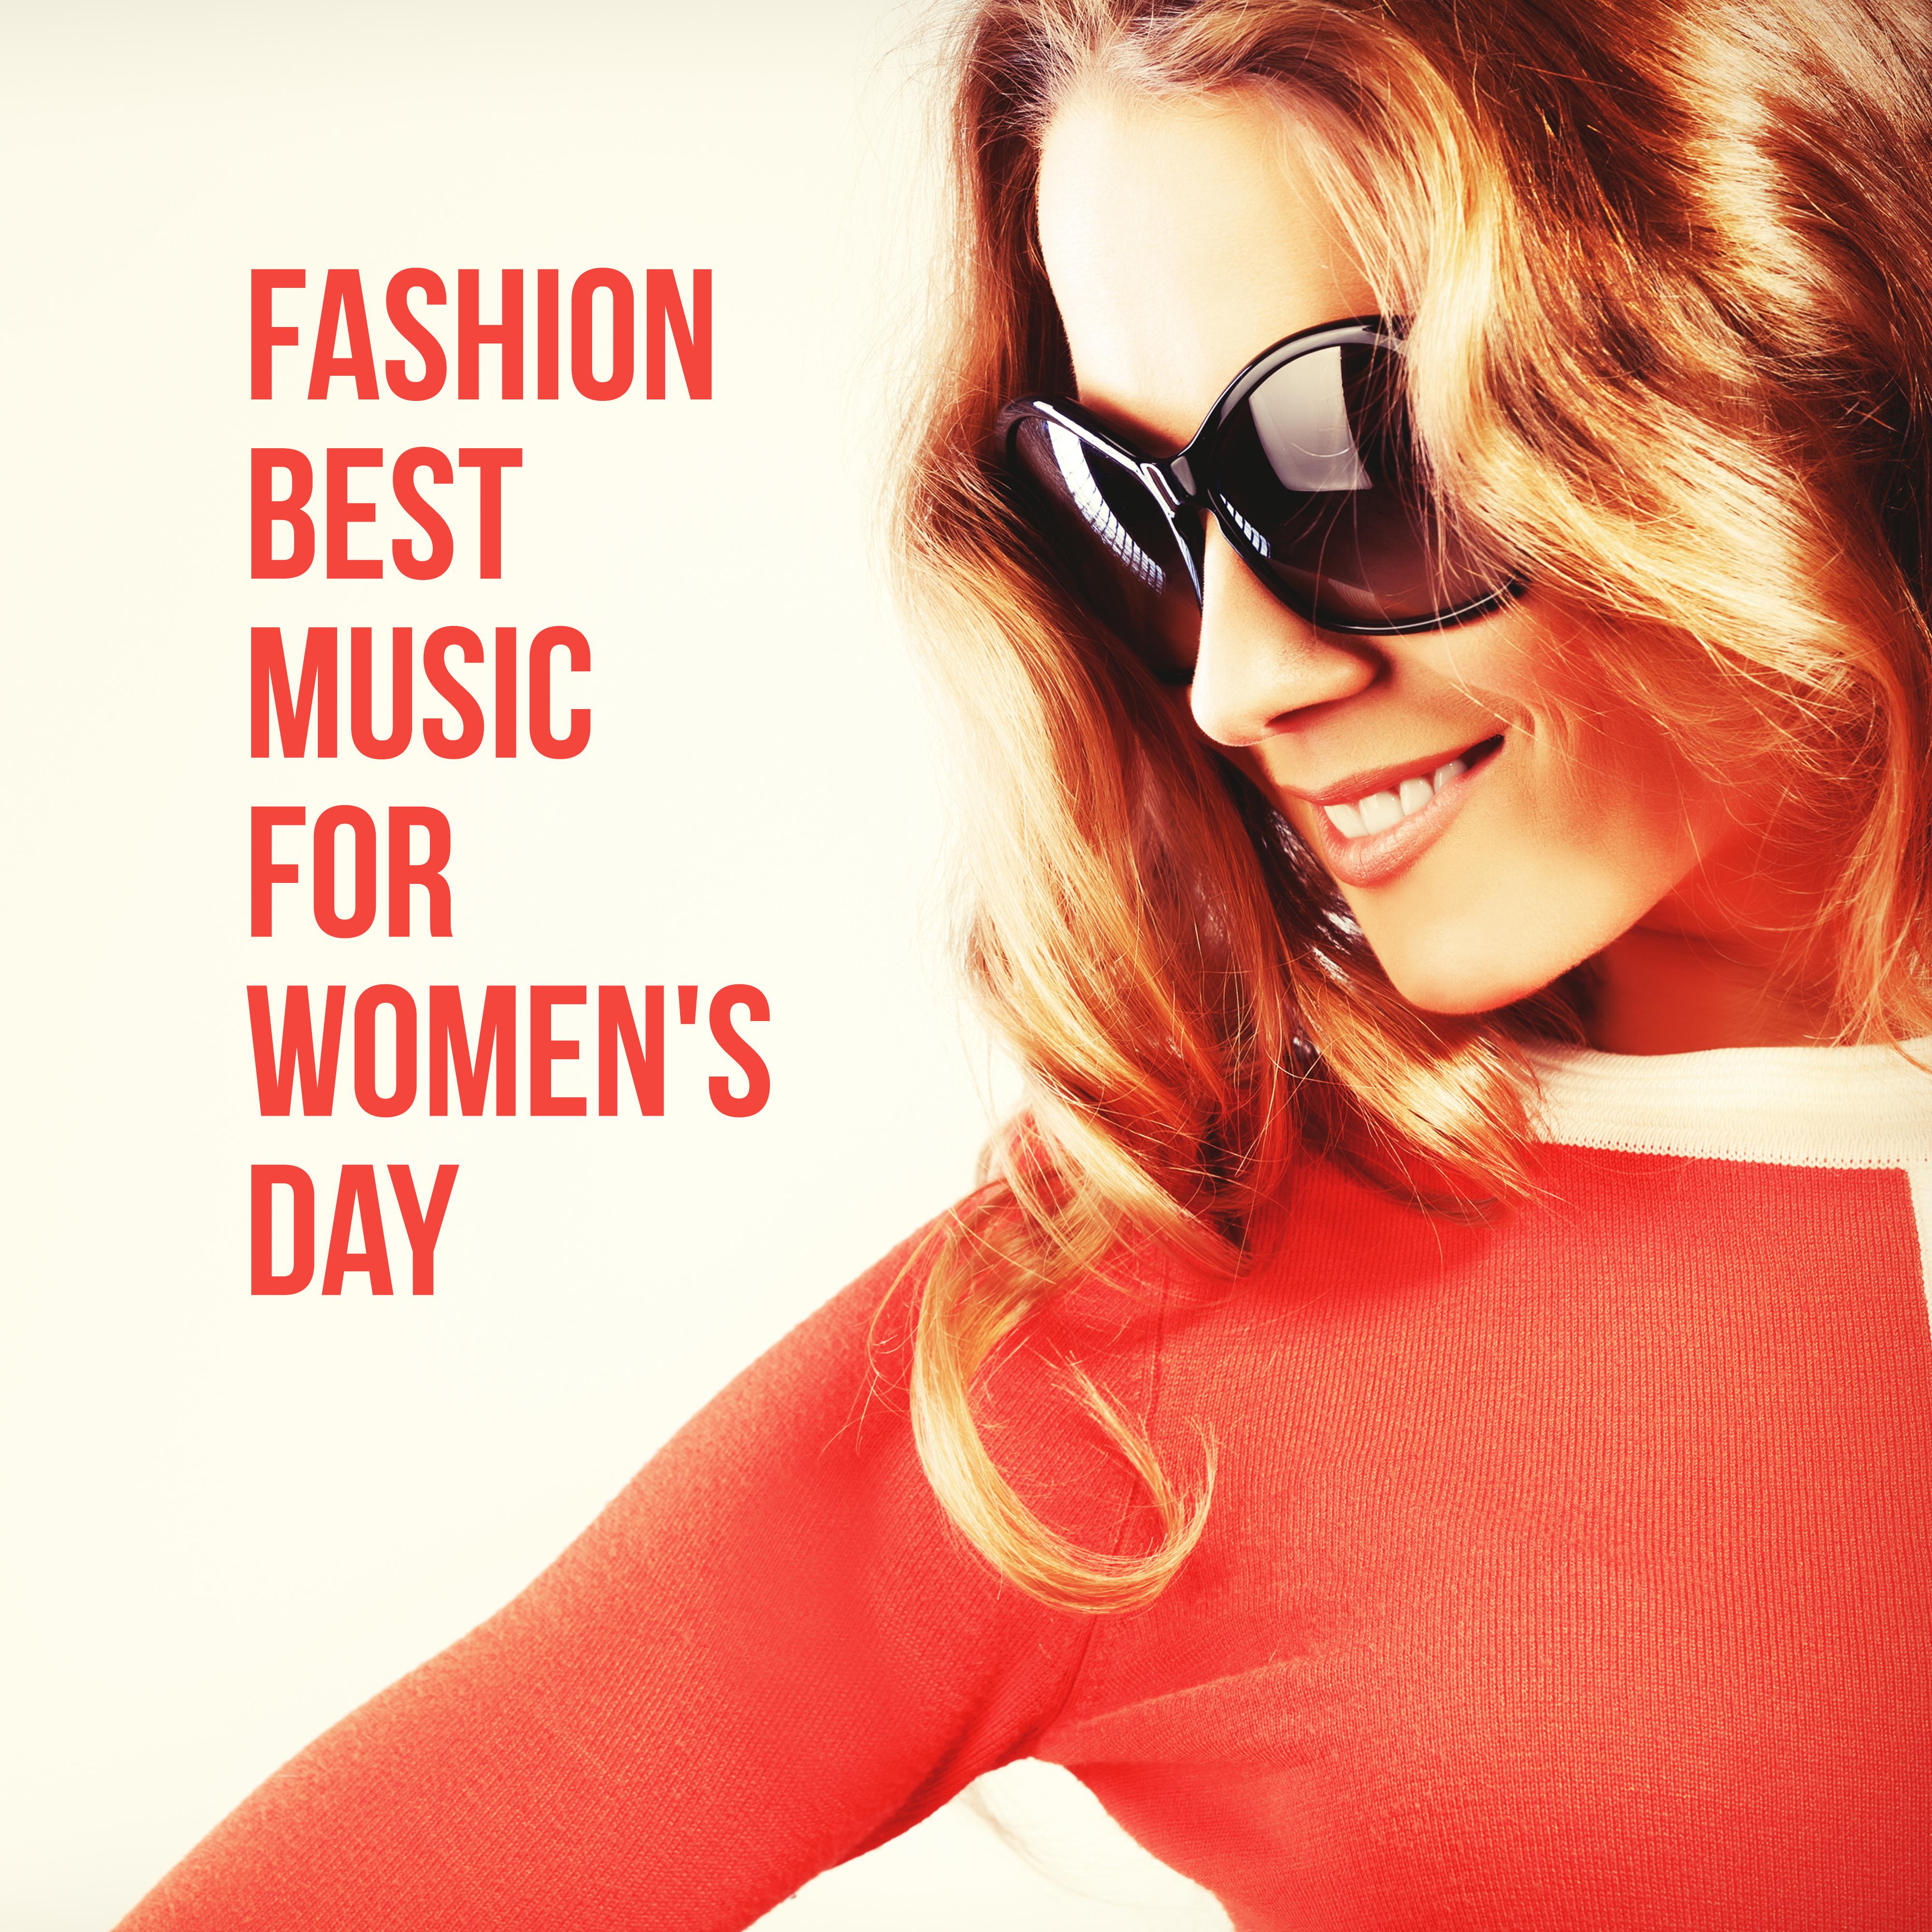 Fashion Best Music for Women' s Day  Relax Zone, Relaxing Fashion Vibes, Music for Woman, Deep Relaxation, Runway Music 2019